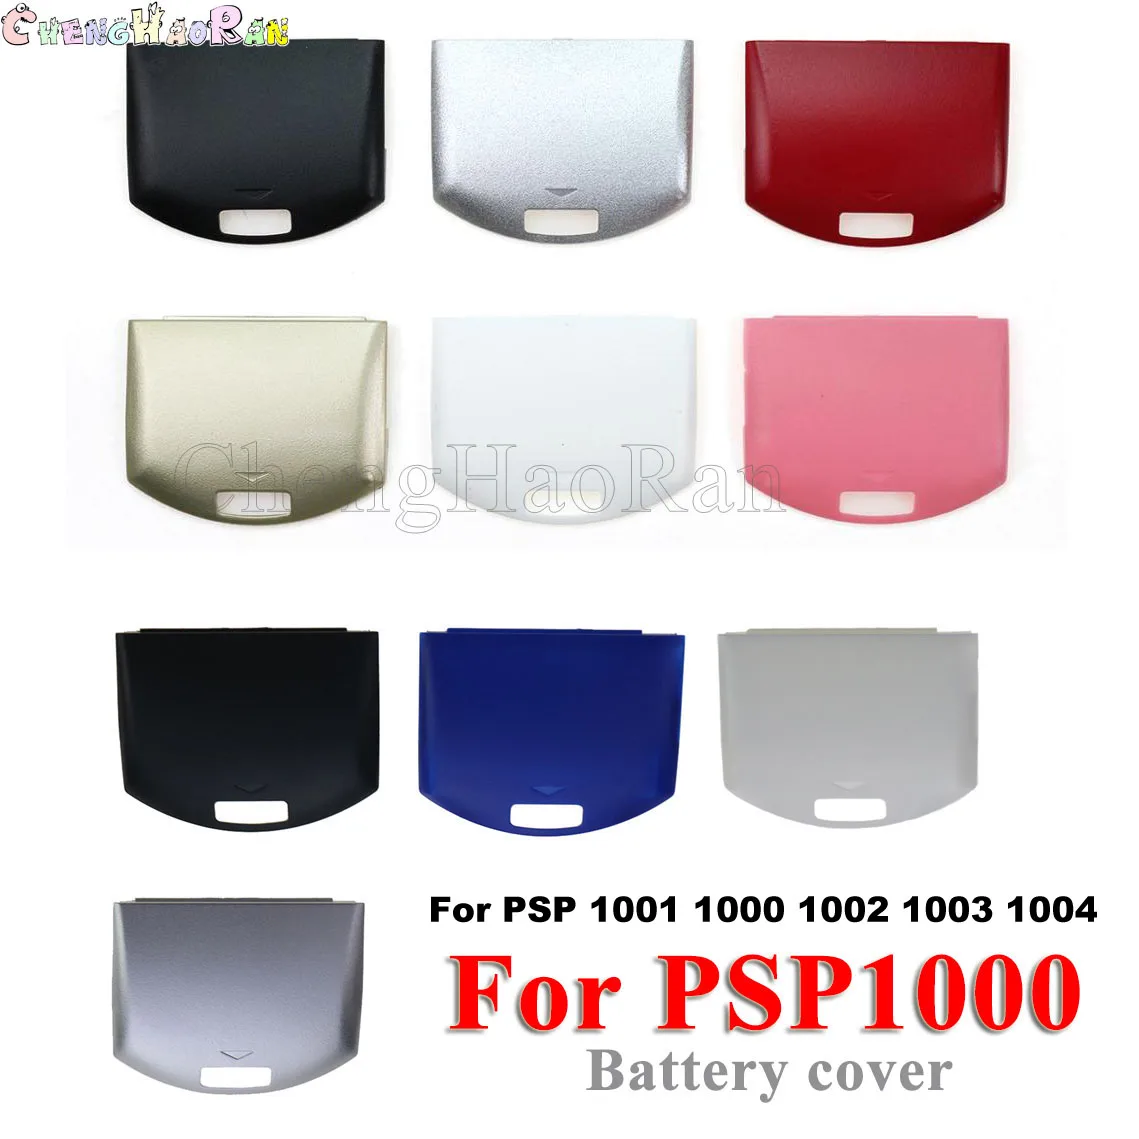 

1pcs Multi colors Battery Cover For PSP 1001 1000 1002 1003 1004 Fat Battery Cover Door For PSP1000 Console